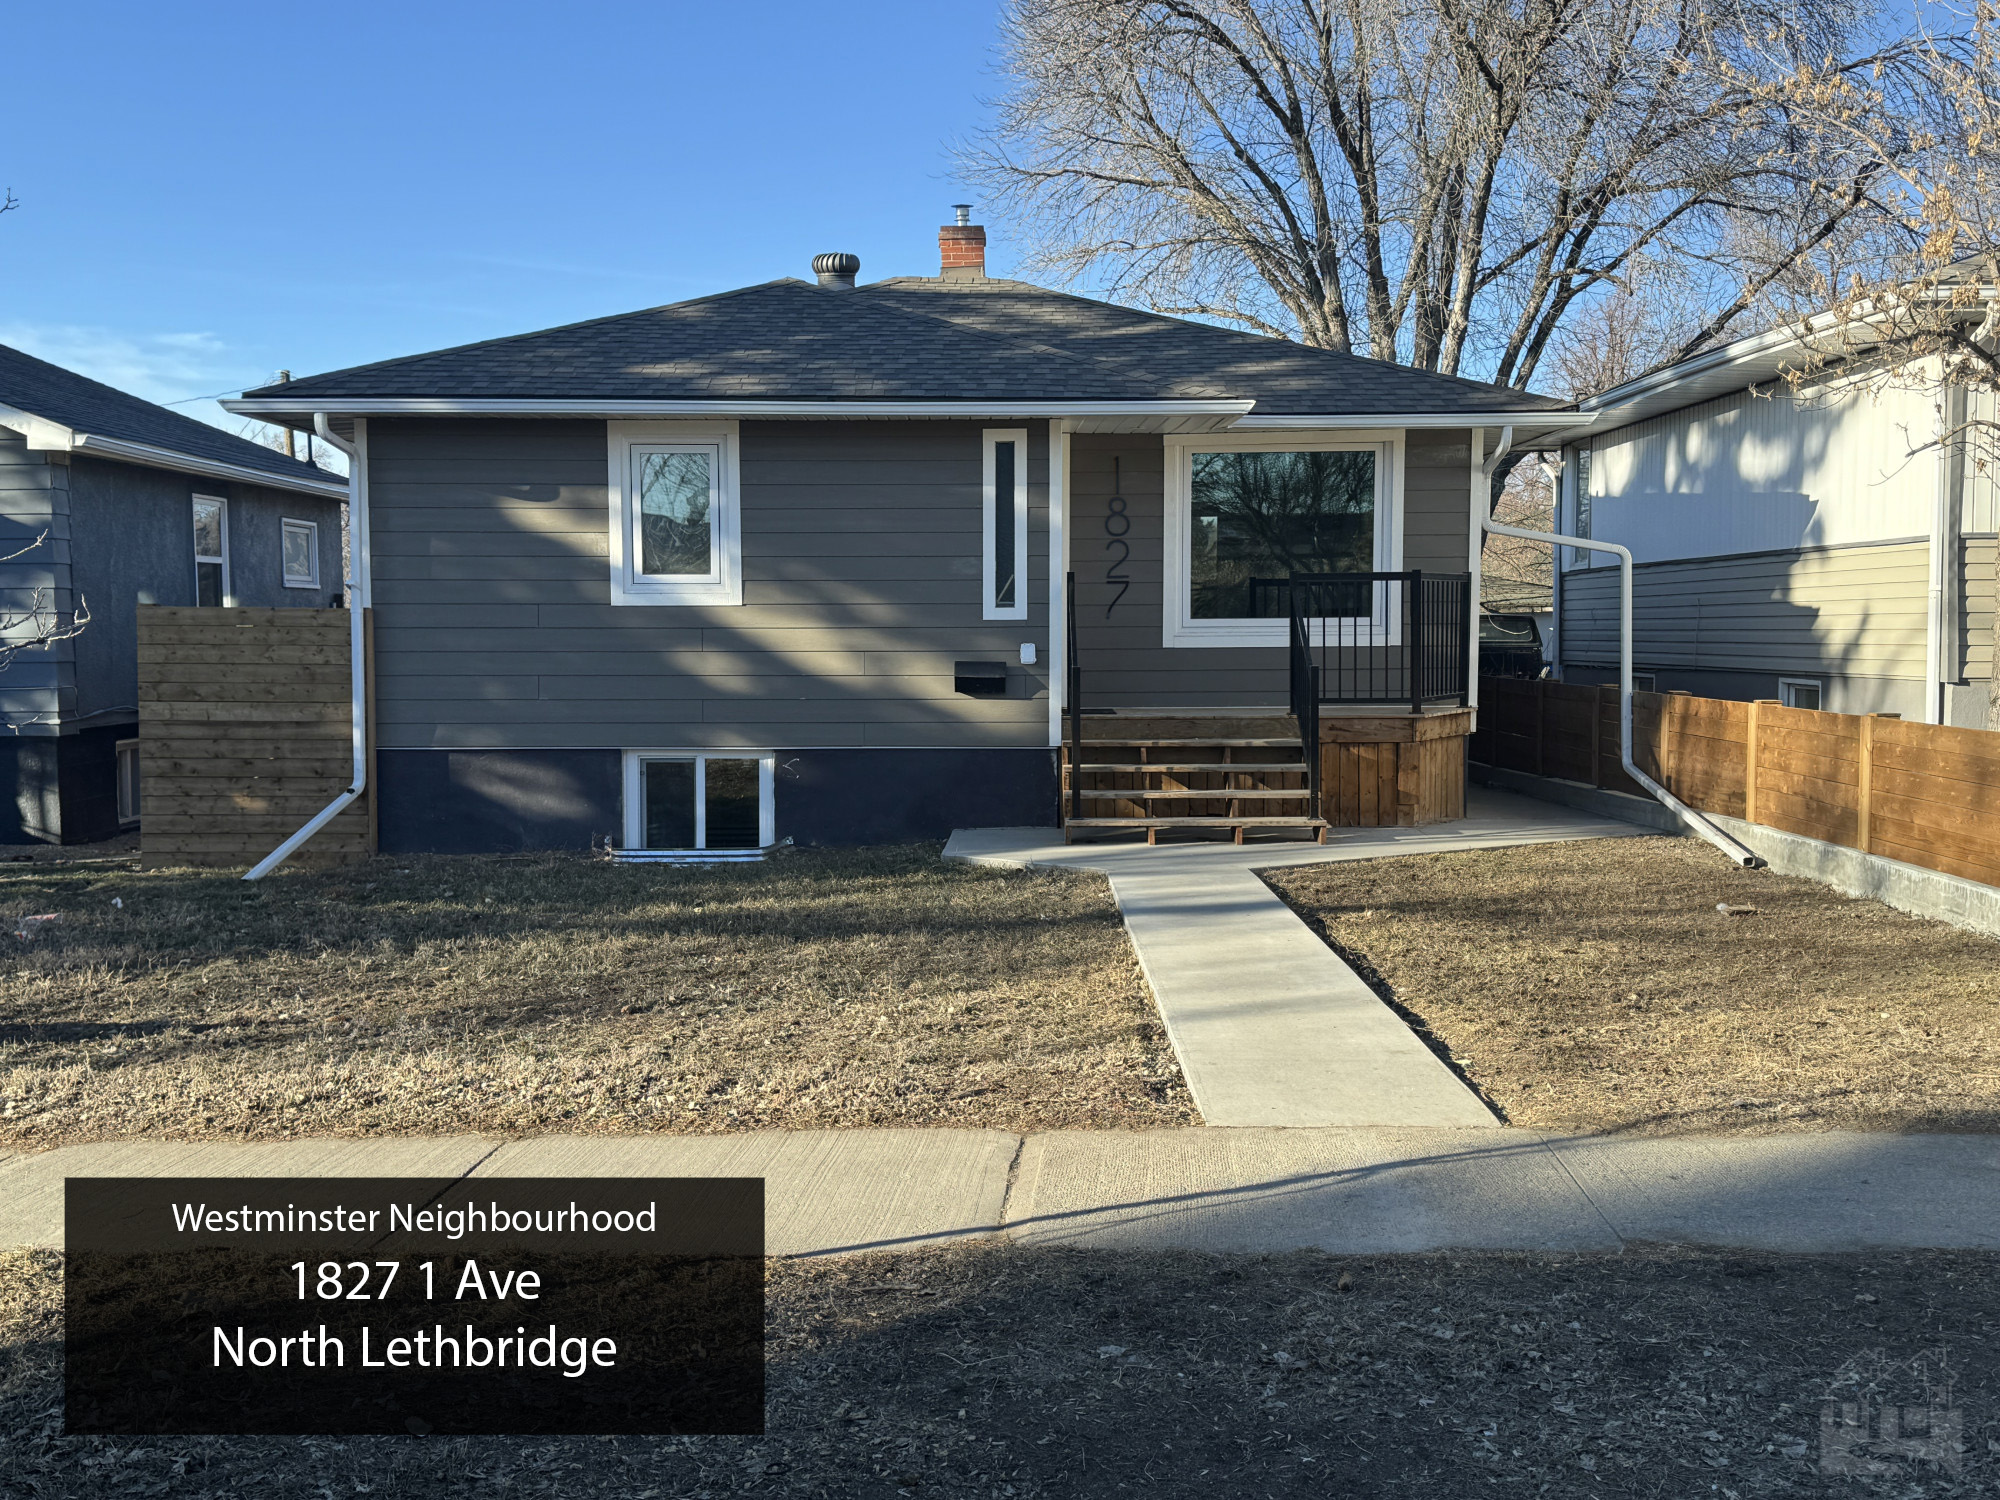 1827 1 Ave North Lethbridge (Mainfloor Suite) Cover image